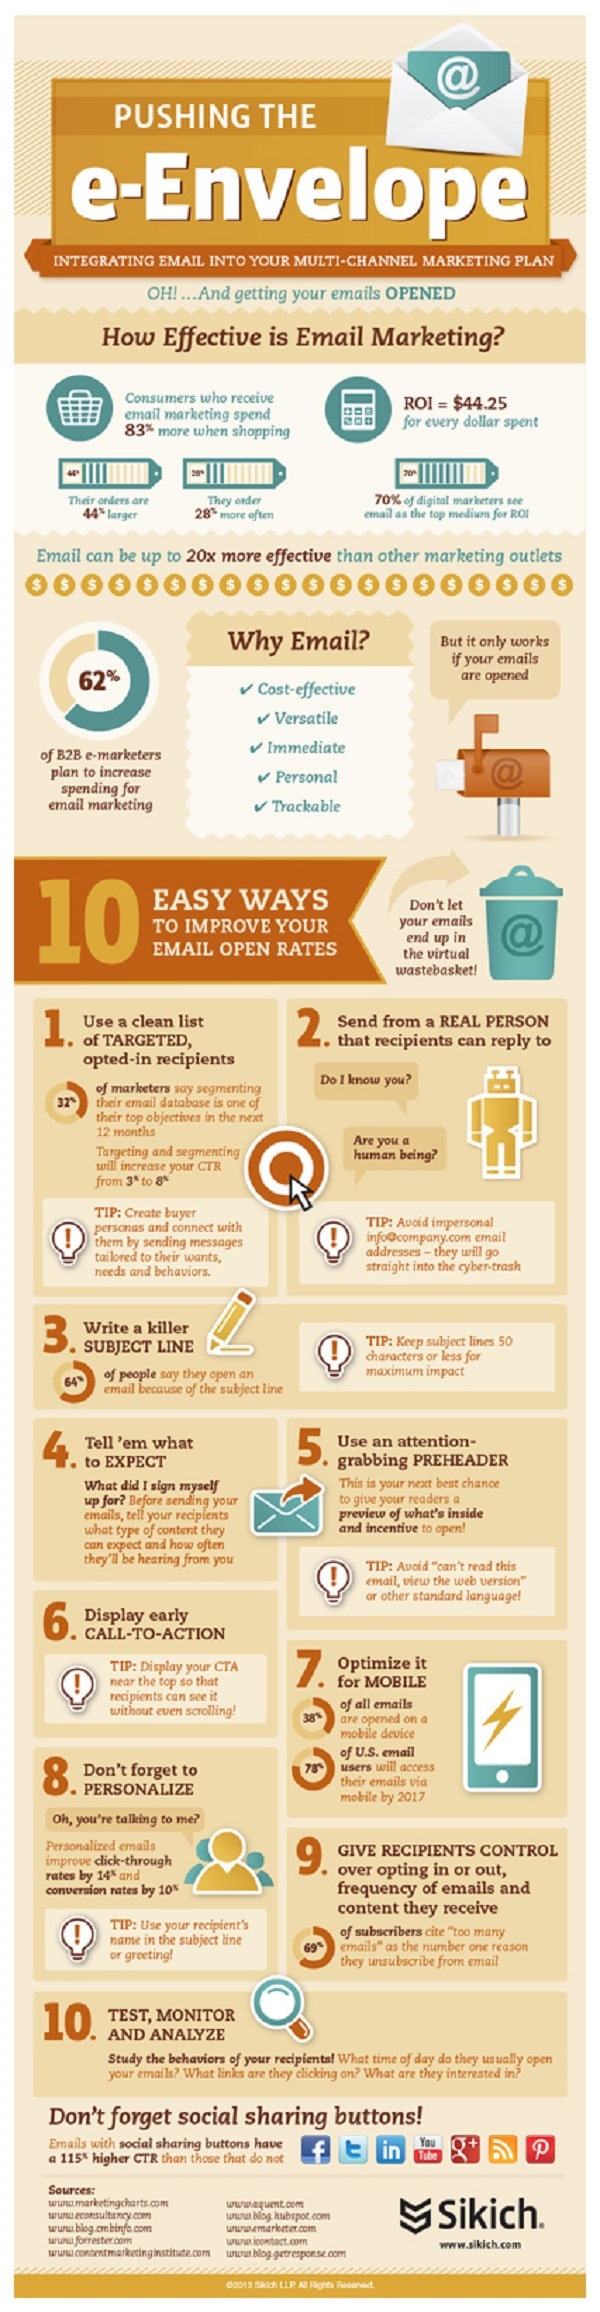 10-easy-ways-to-improve-your-email-open-rates